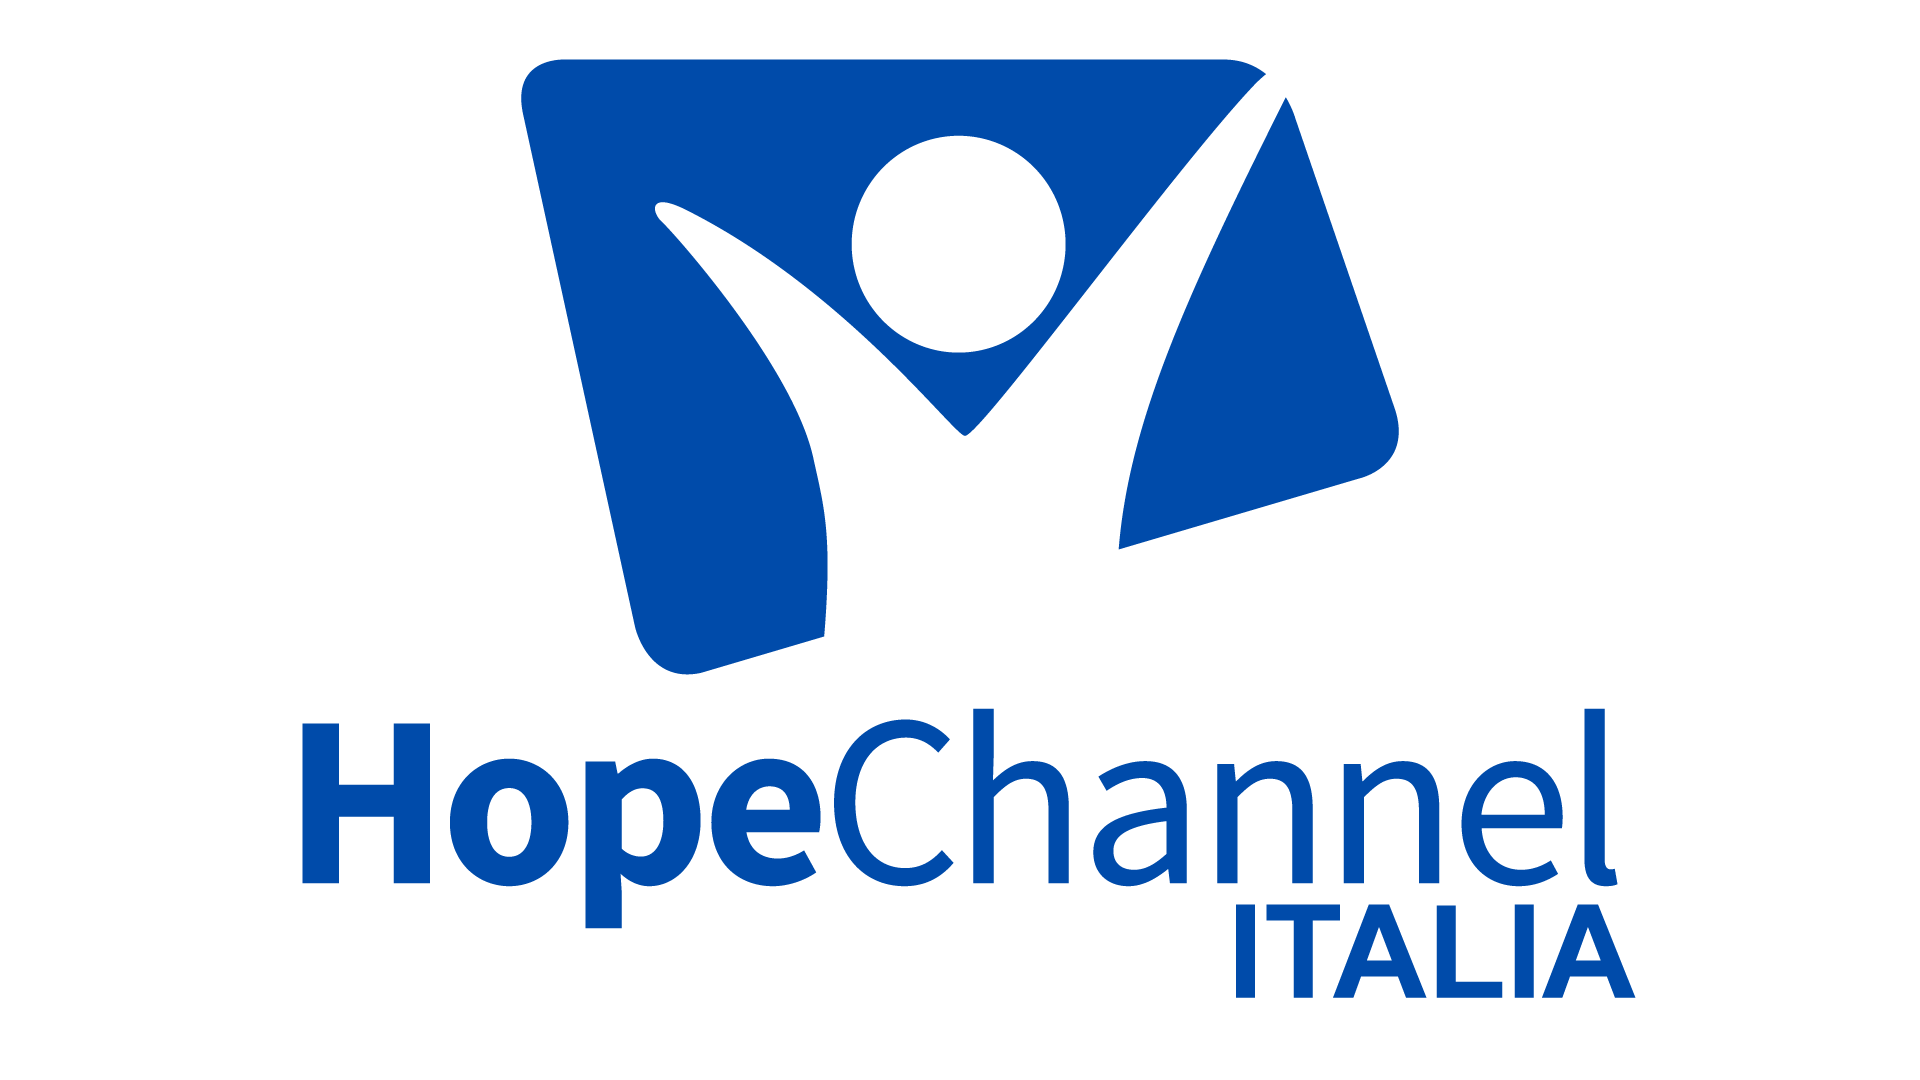 Hope Channel Italia Live TV, Online